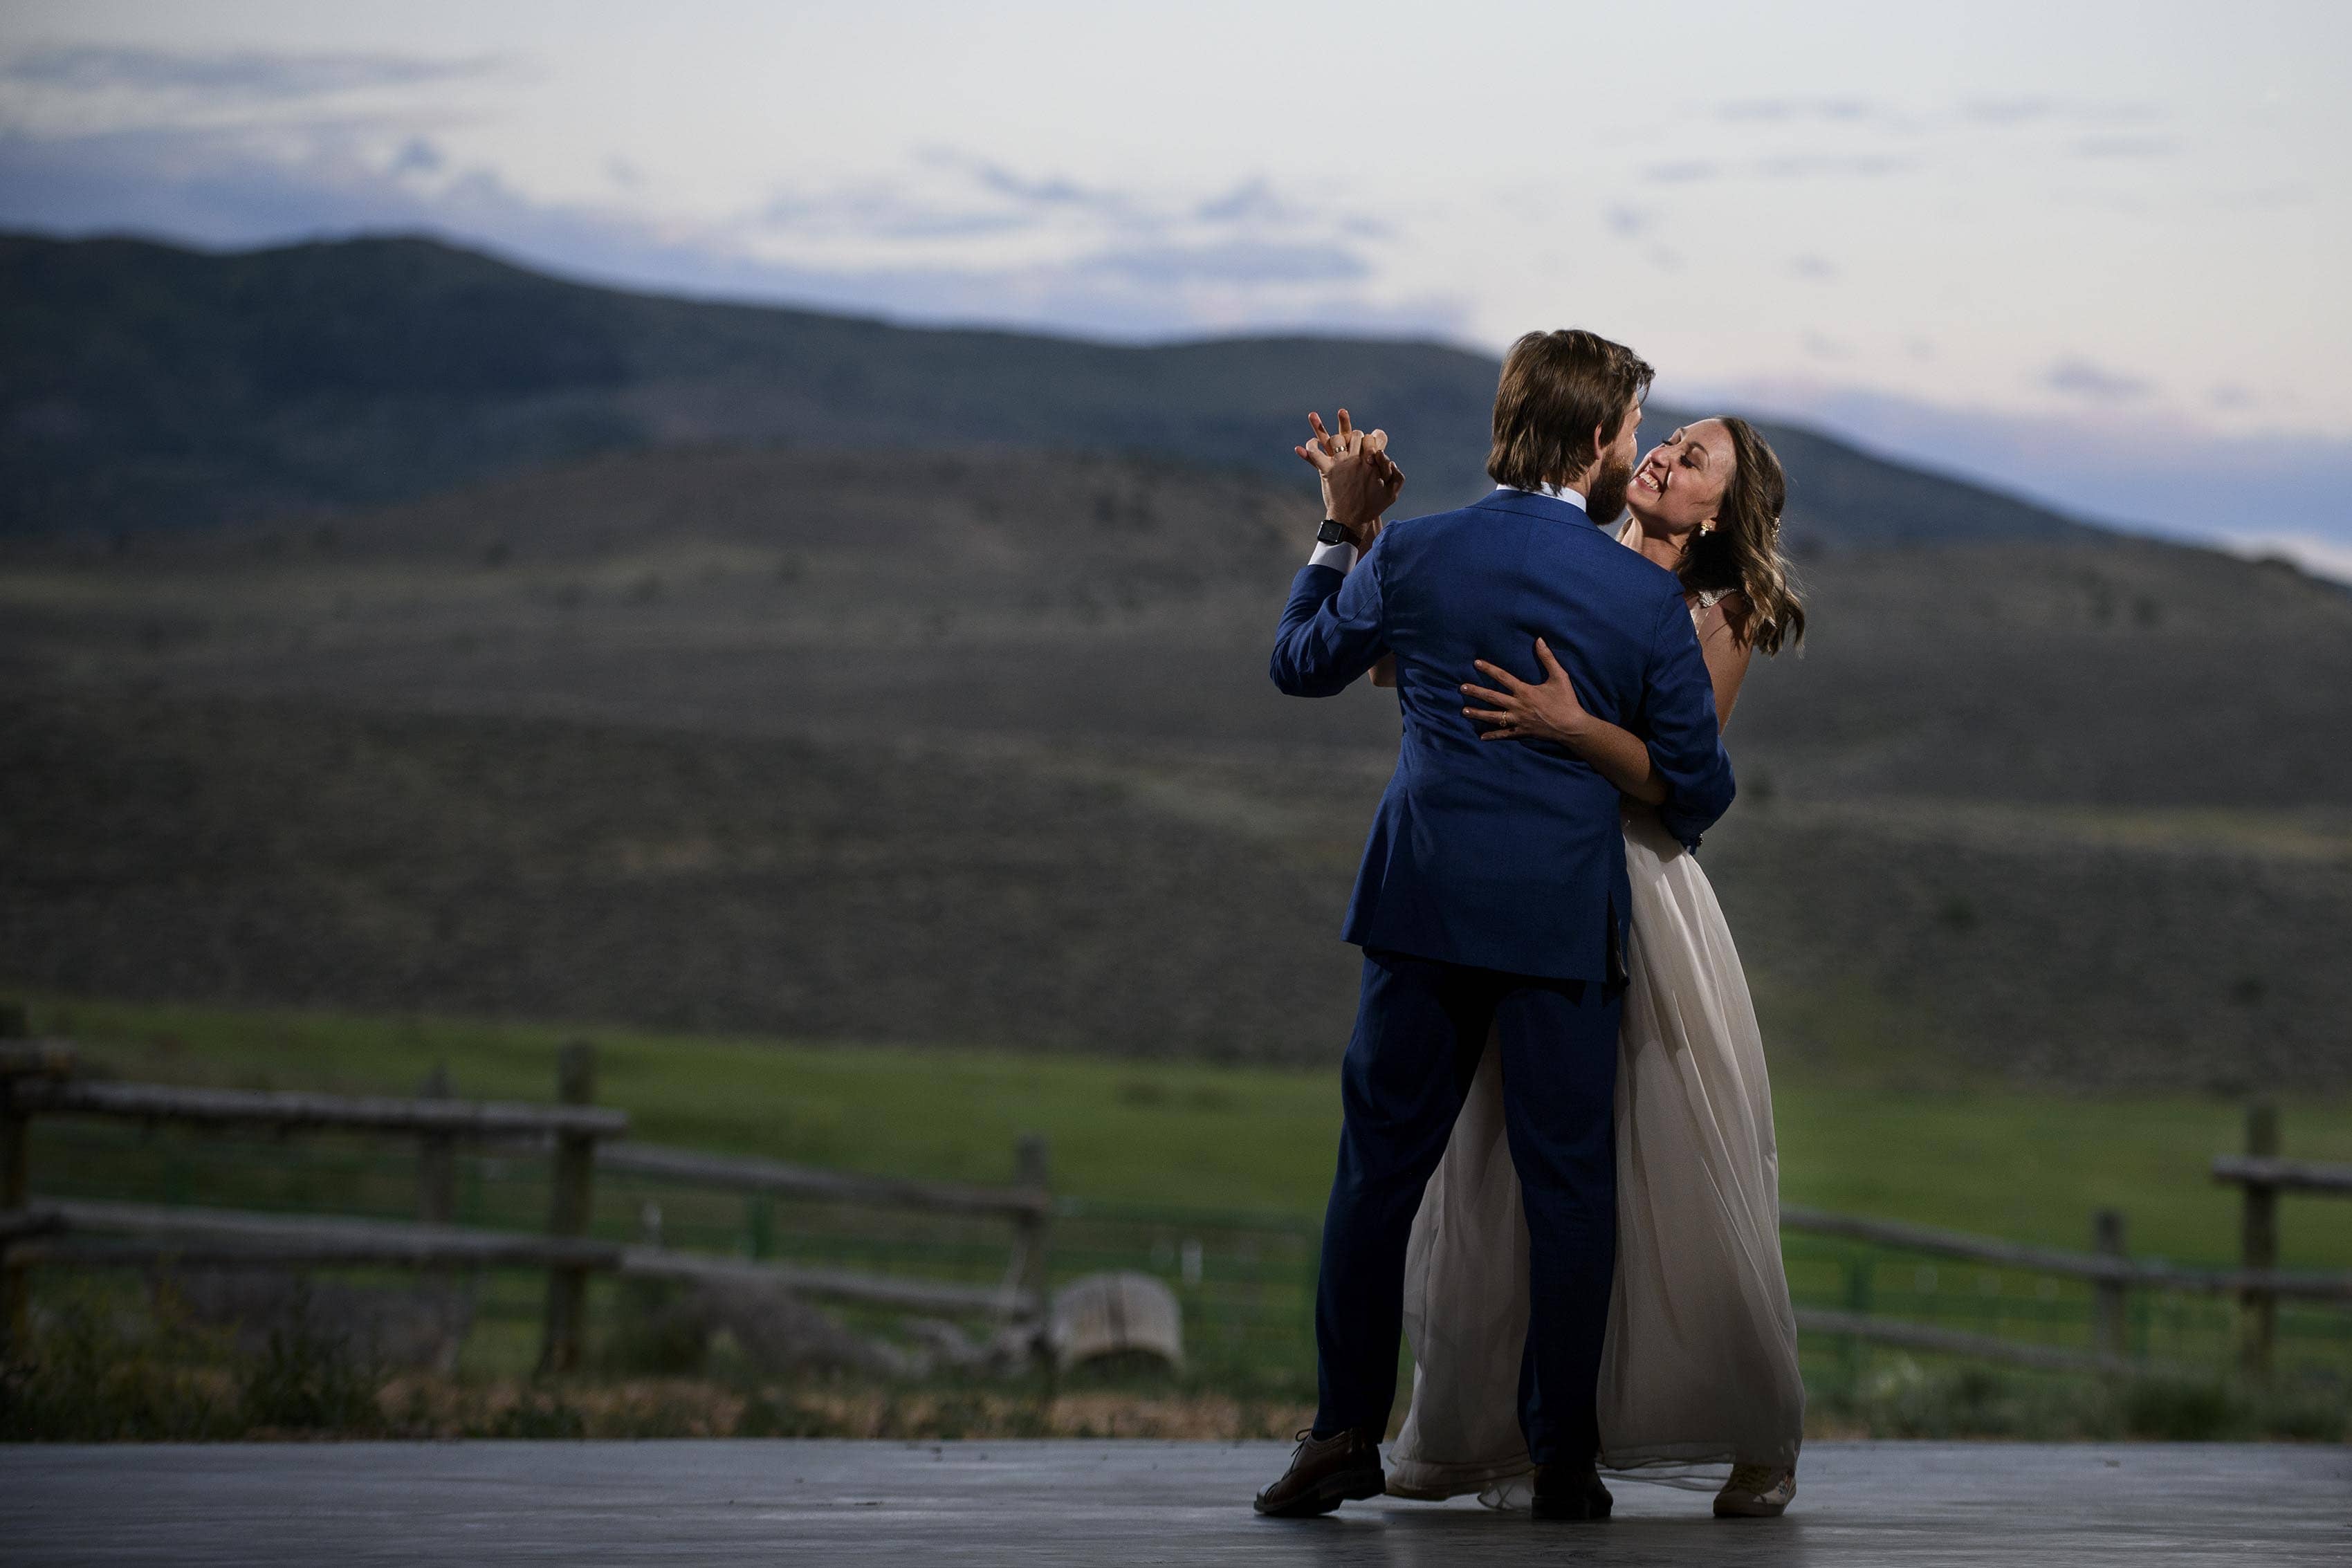 The couple shaire their first dance together in the barn at 4 Eagle Ranch